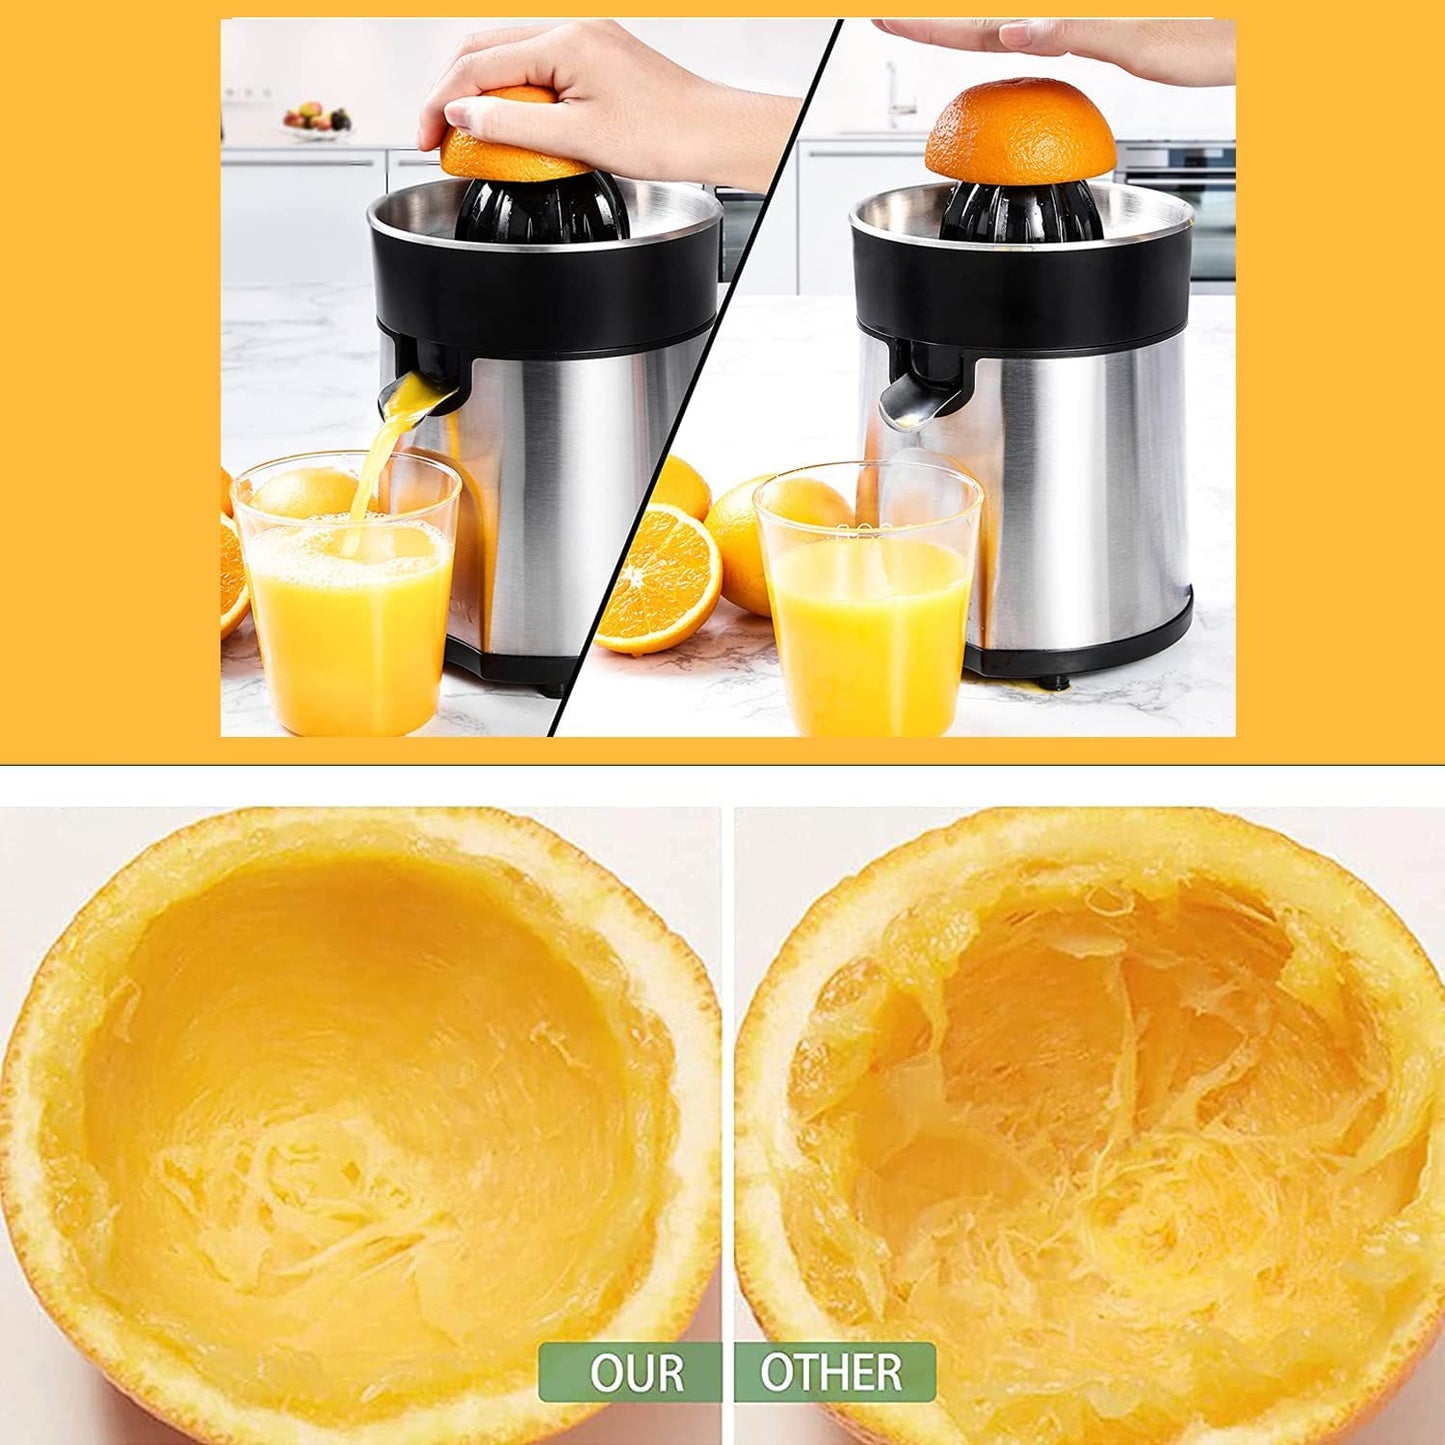 AICOK Electric Citrus Juicer with 2 Stainless Steel Cones, Quiet 85W Motor, Fast Fresh Juice, BPA Free, Dishwasher Safe